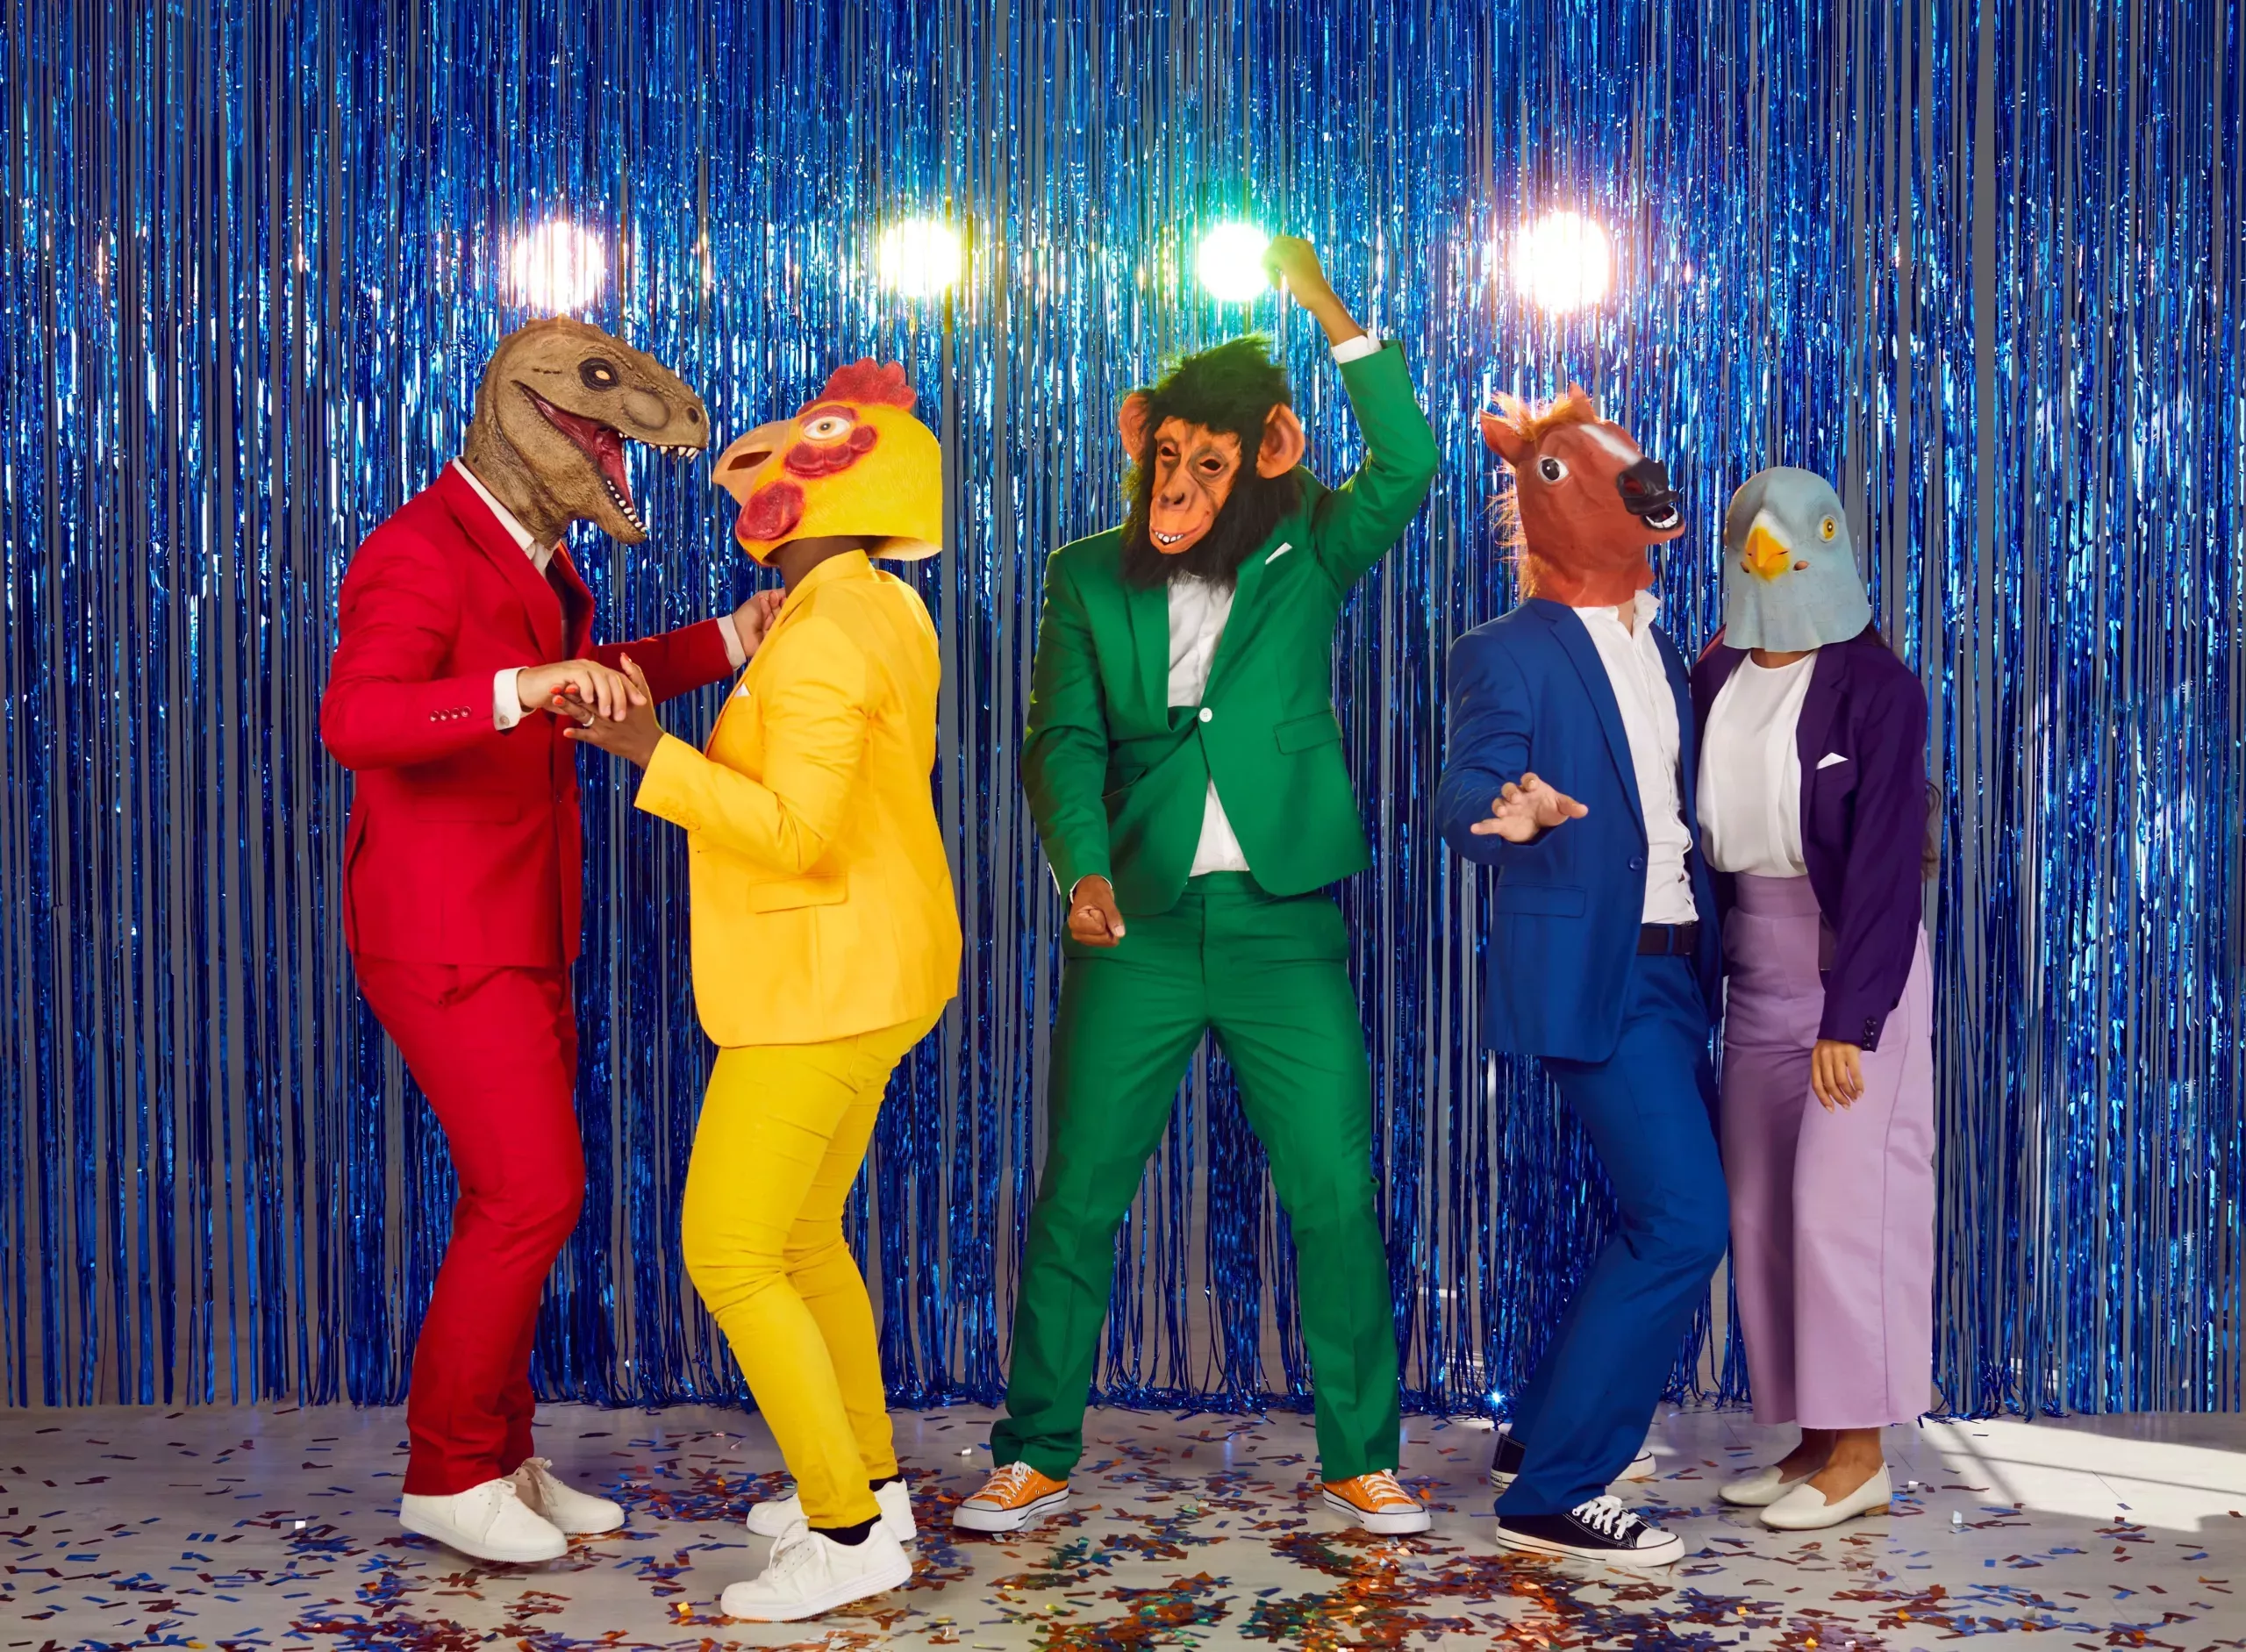 A group of people dancing wearing different animal heads and suit colors from the rainbow. 